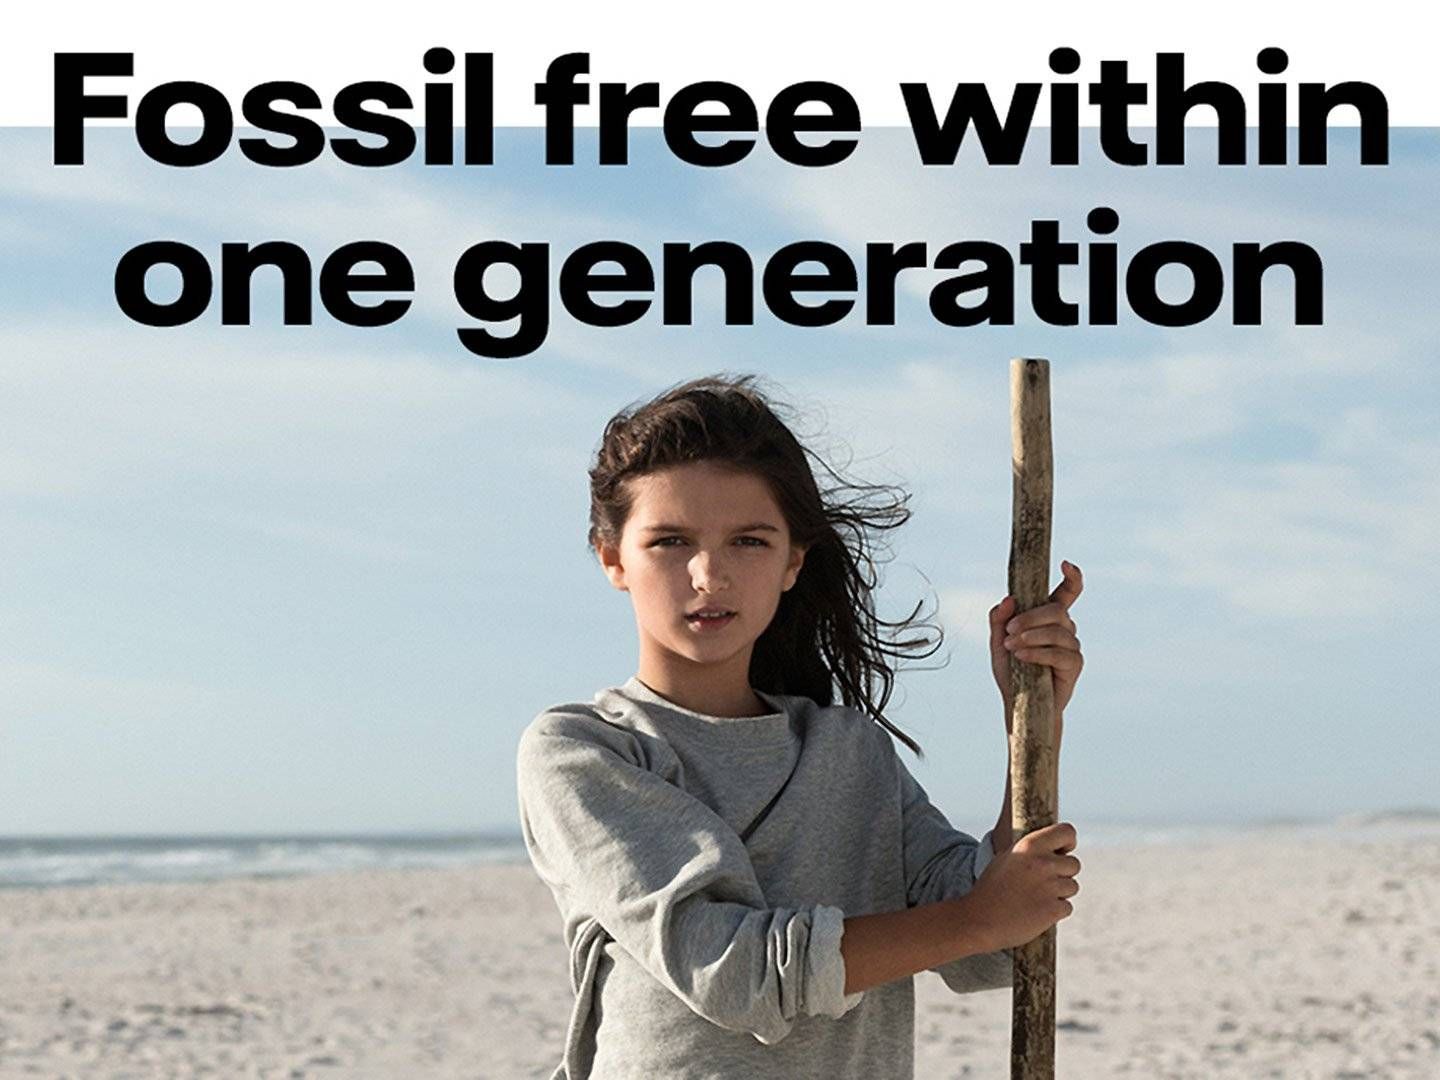 In 2017, Vattenfall launched its strategy to be fossil-free within one generation. After a raised finger from the authorities, it is now dropped as a slogan. | Foto: Vattenfall